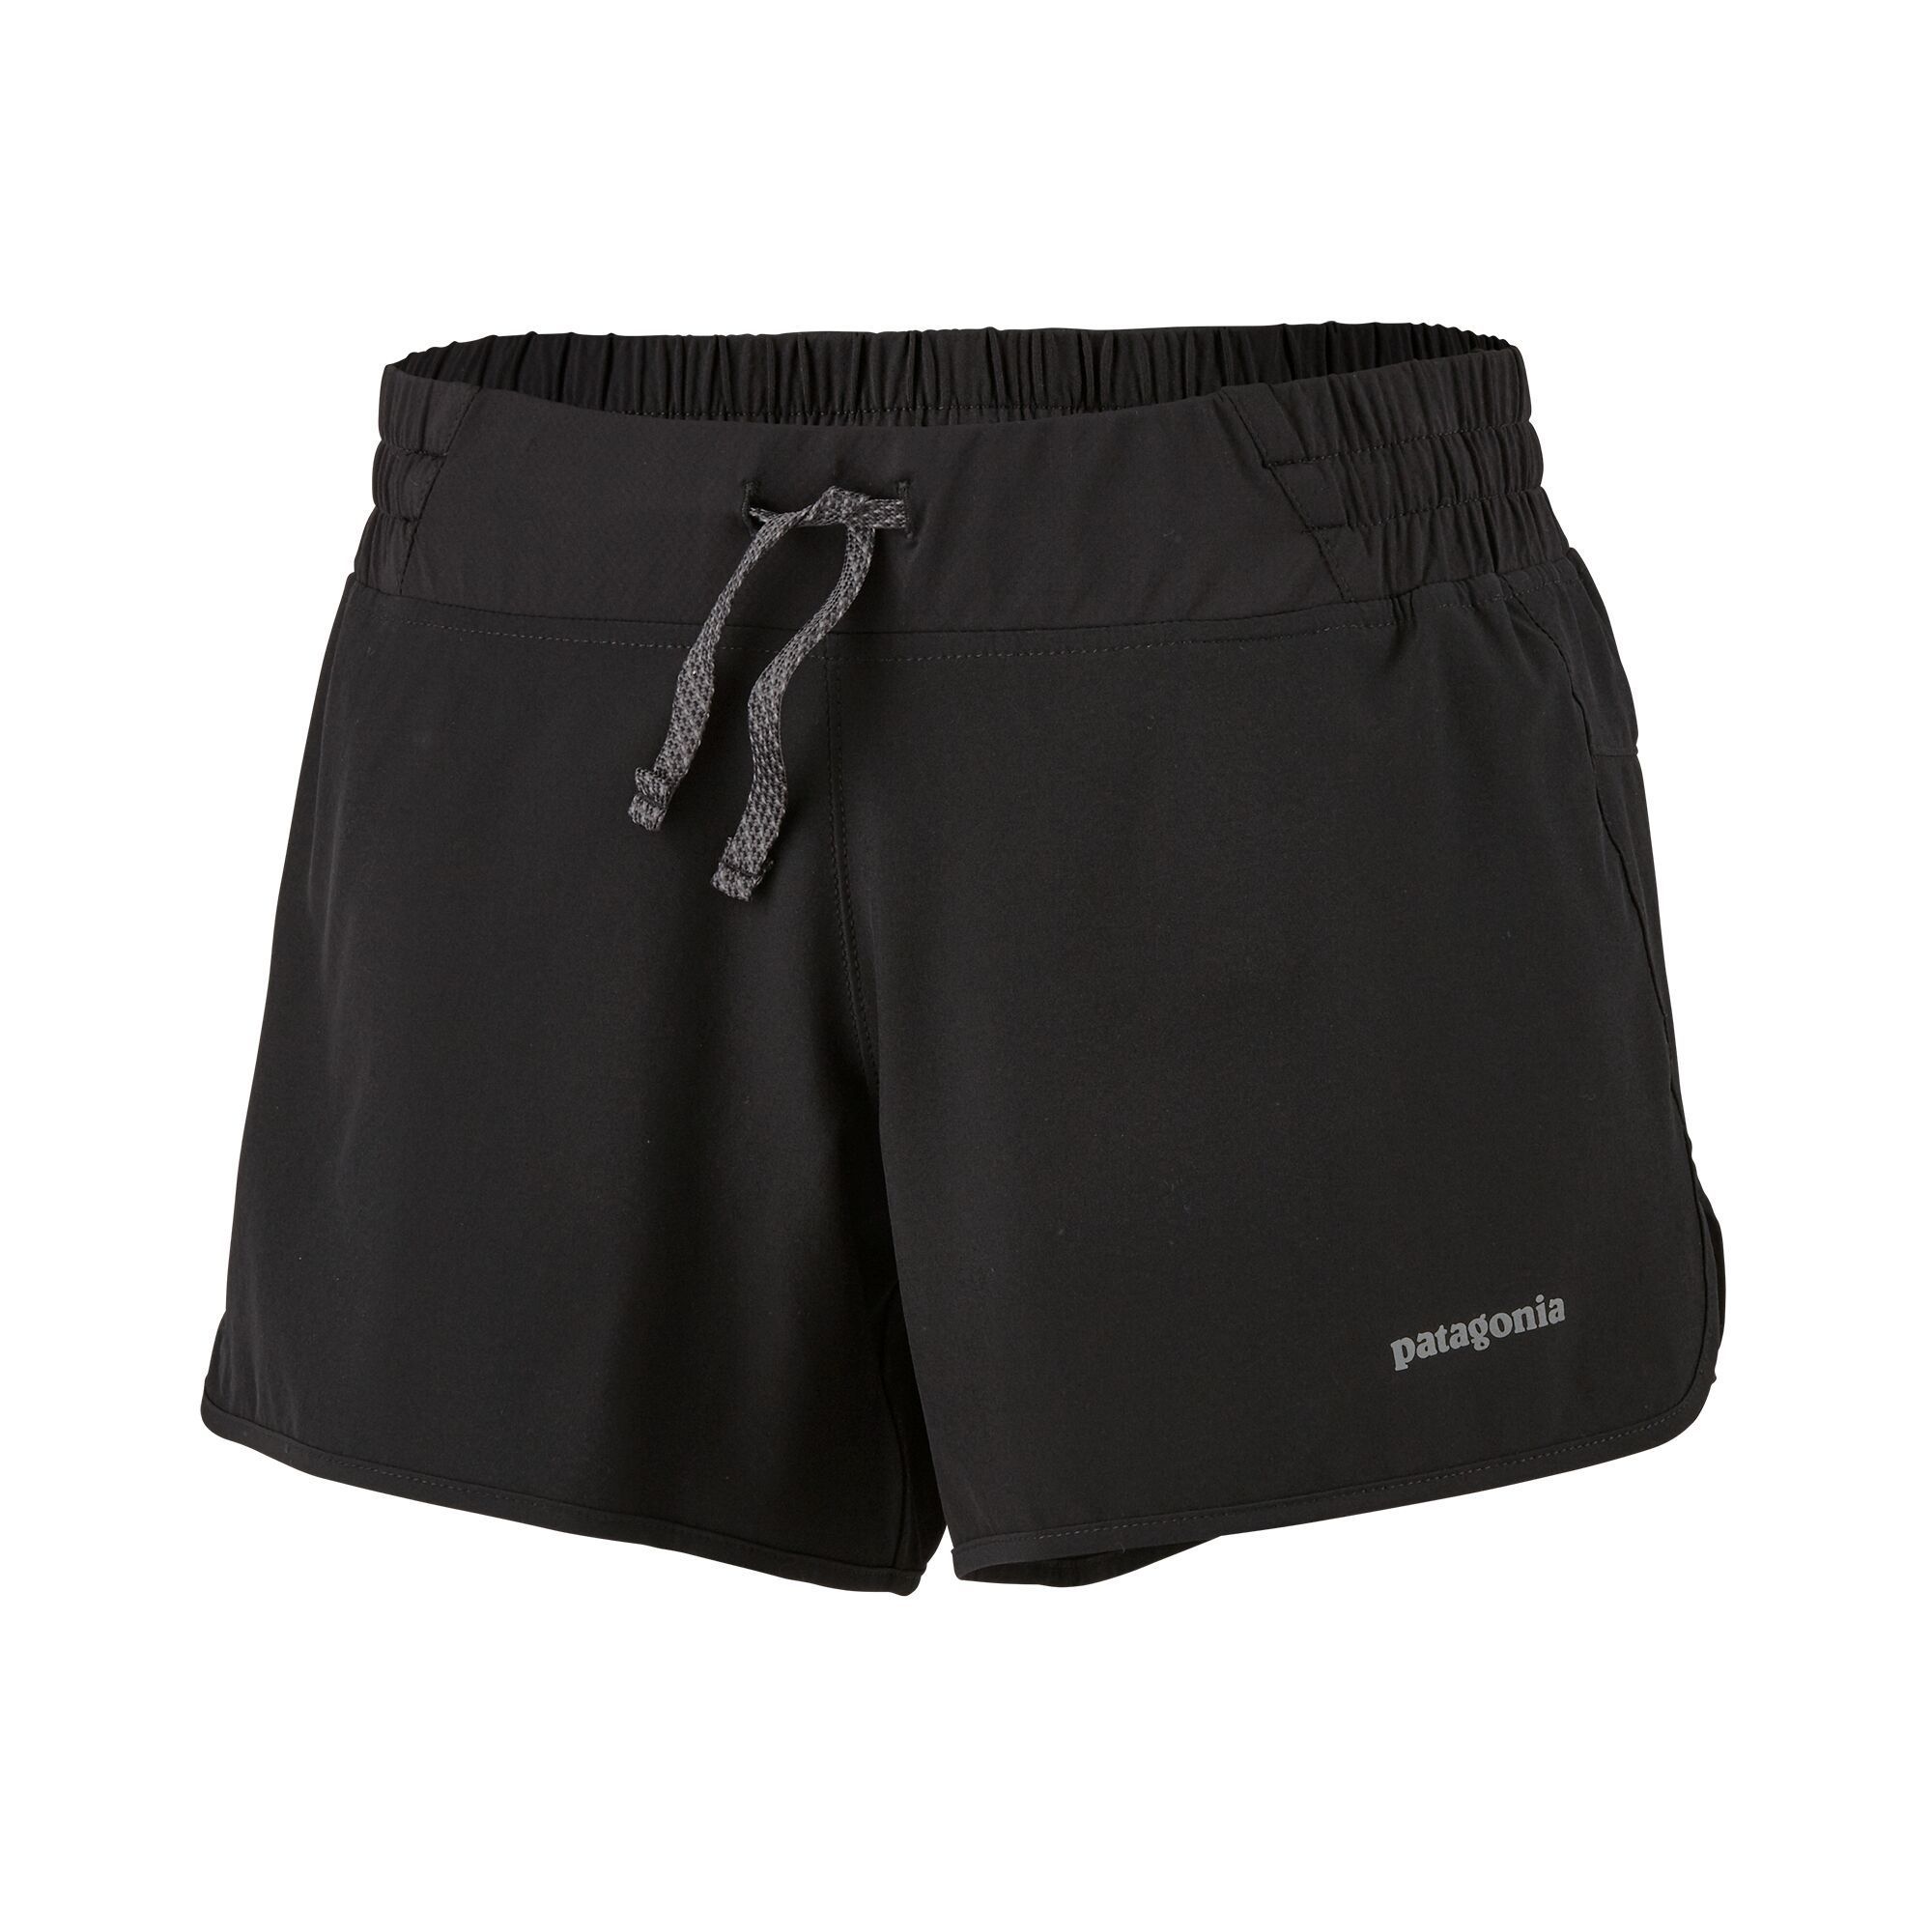 Patagonia Women's Nine Trails Shorts - 4" - Recycled Polyester, Black / S